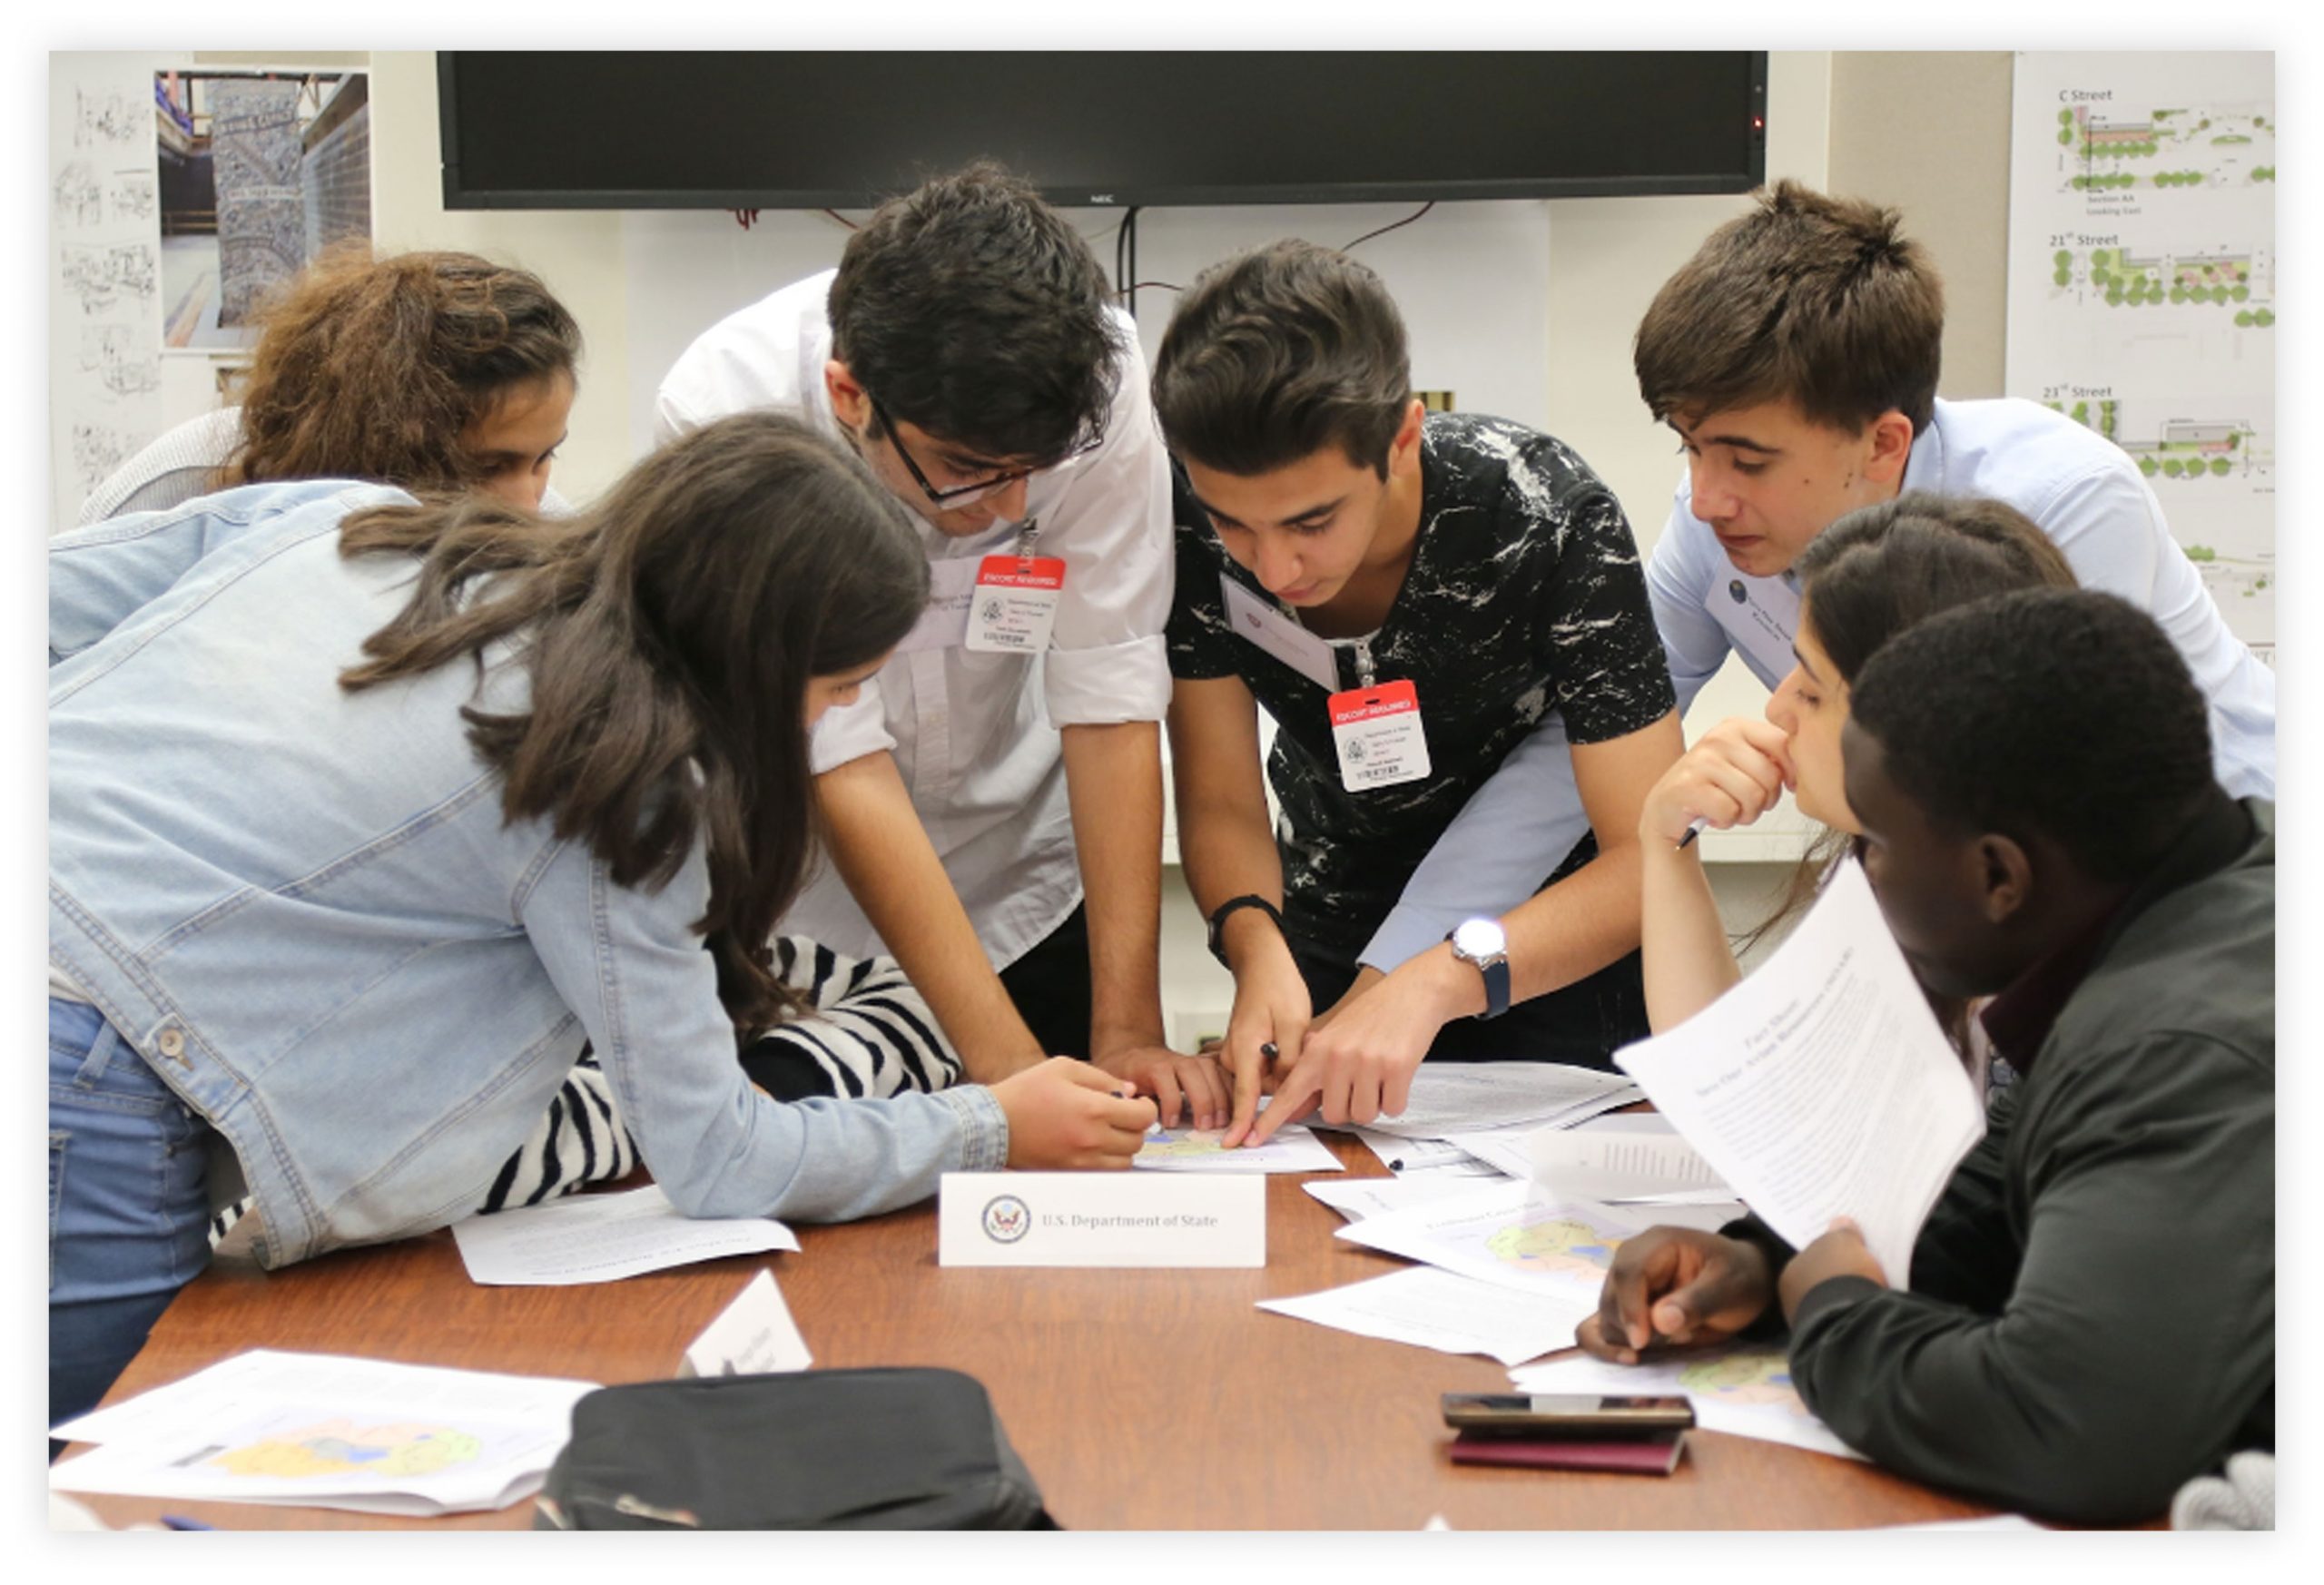 A group of students around a table looking at papers, pointing, and discussing.